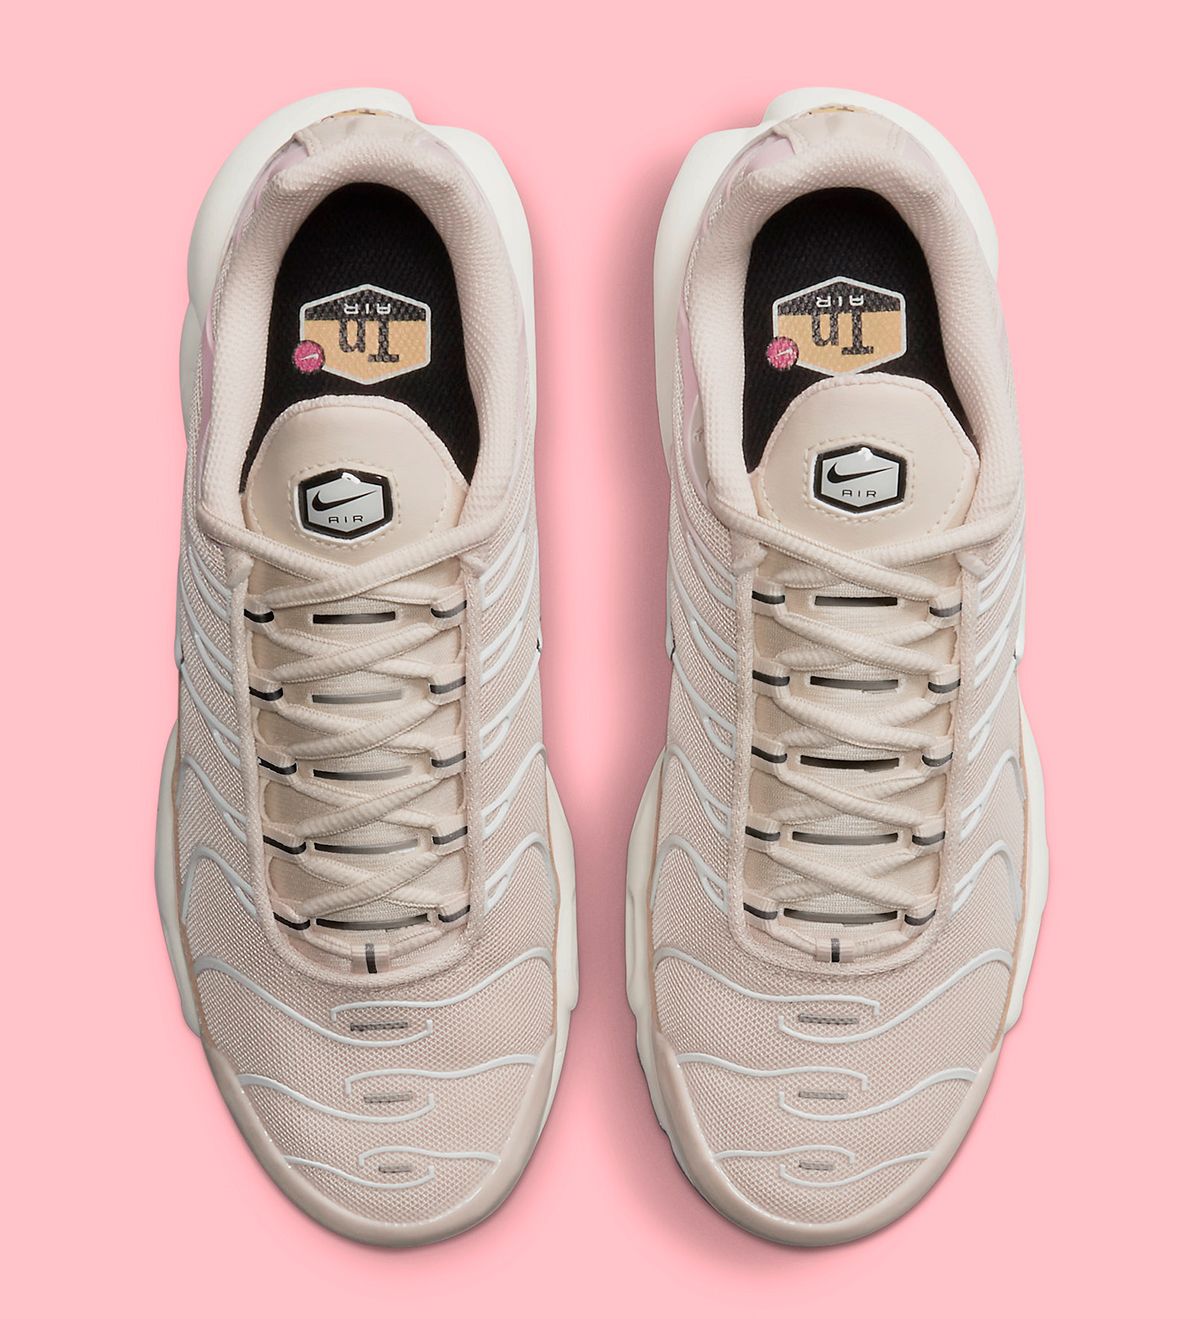 The Nike Air Max Plus Appears in Sandrift and Oxford Pink | HOUSE OF HEAT